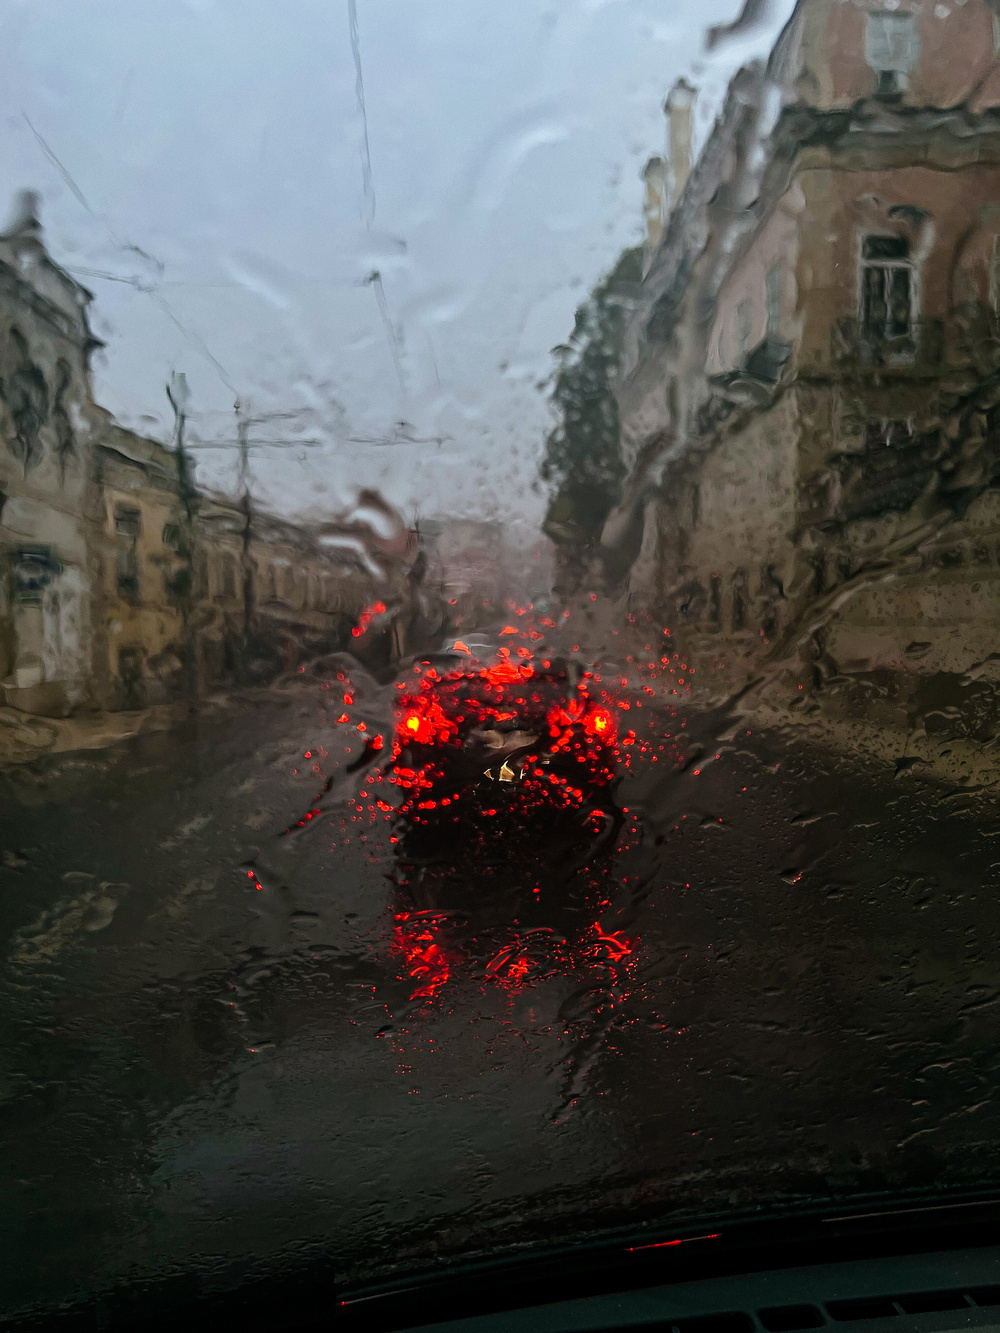 rainy street seen from the inside of a car